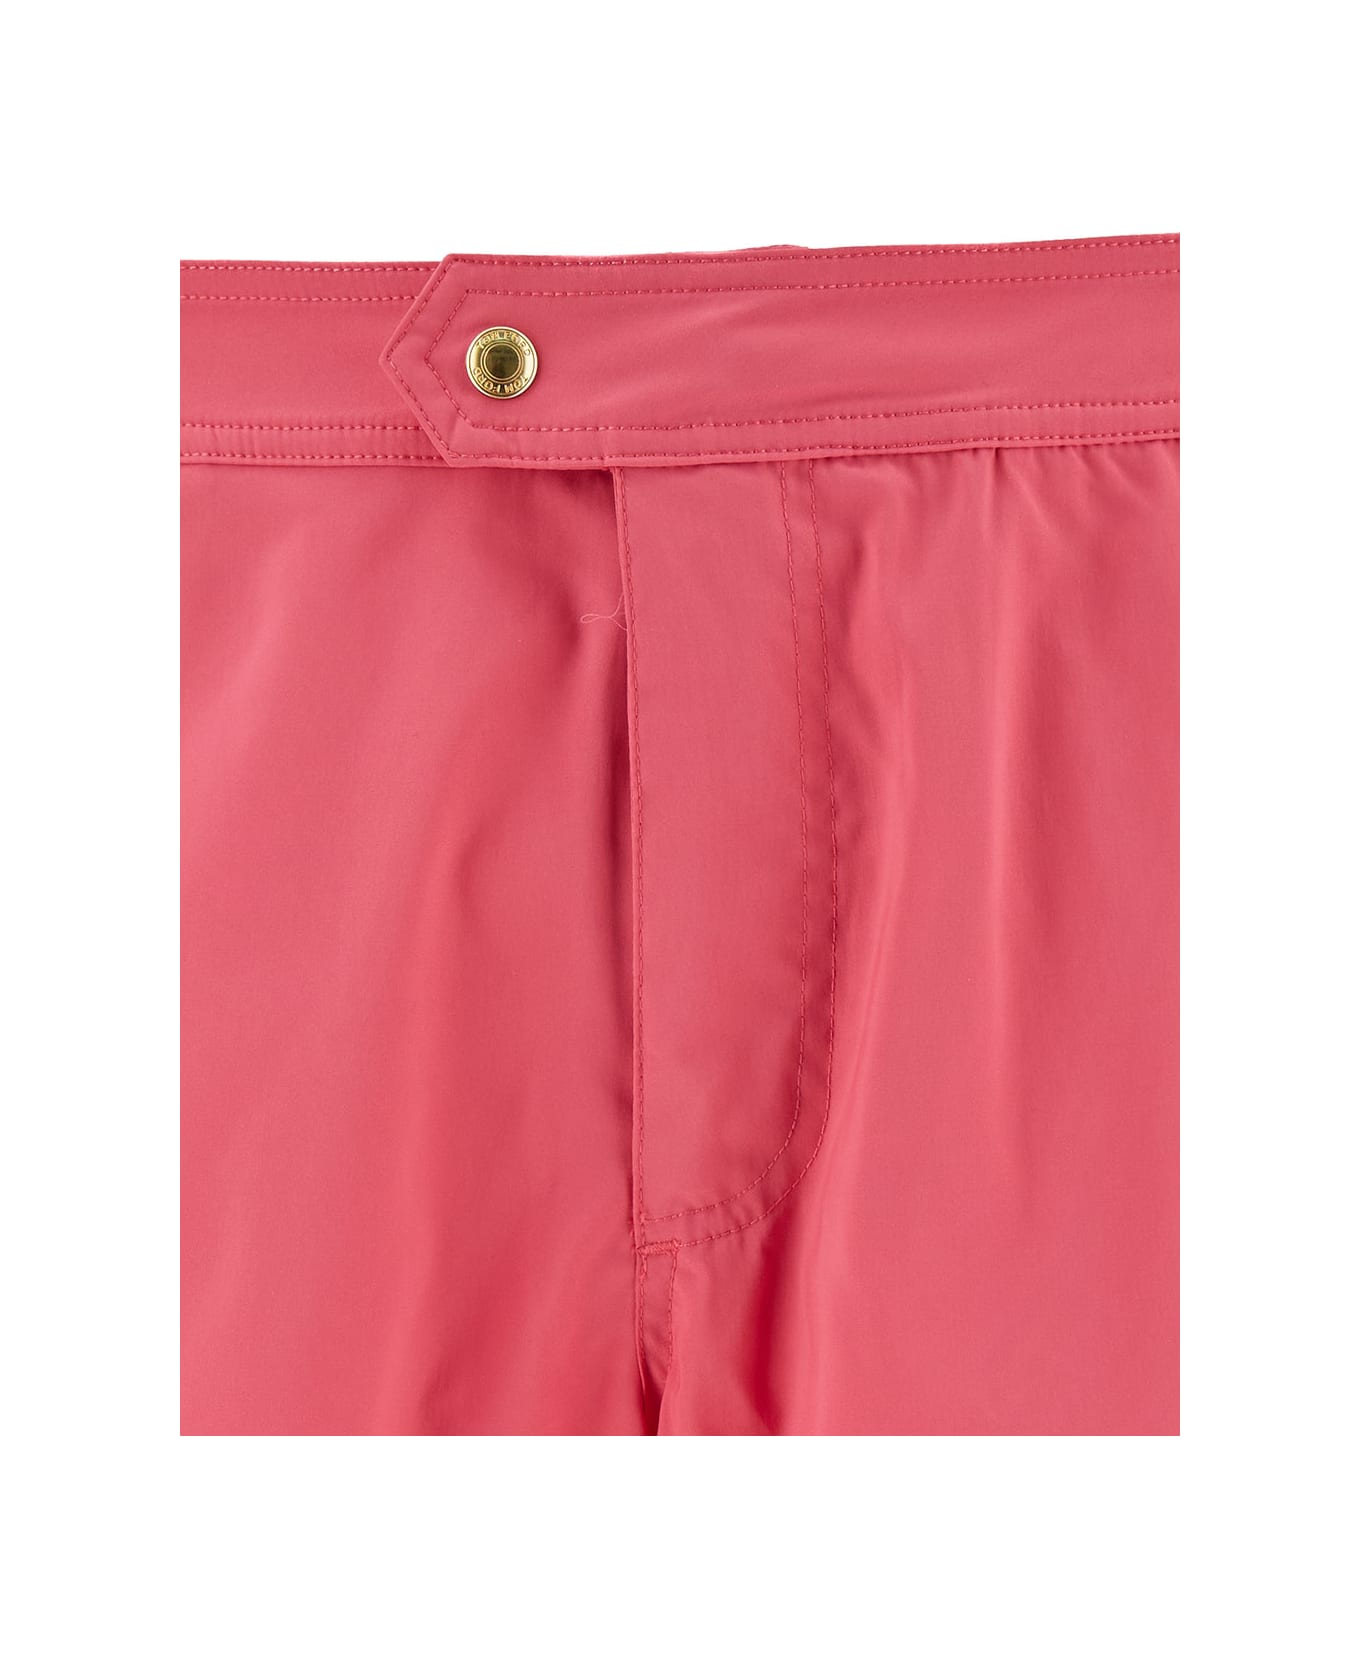 Tom Ford Salmon Pink Swim Shorts With Branded Button In Nylon Man - Fuxia 水着